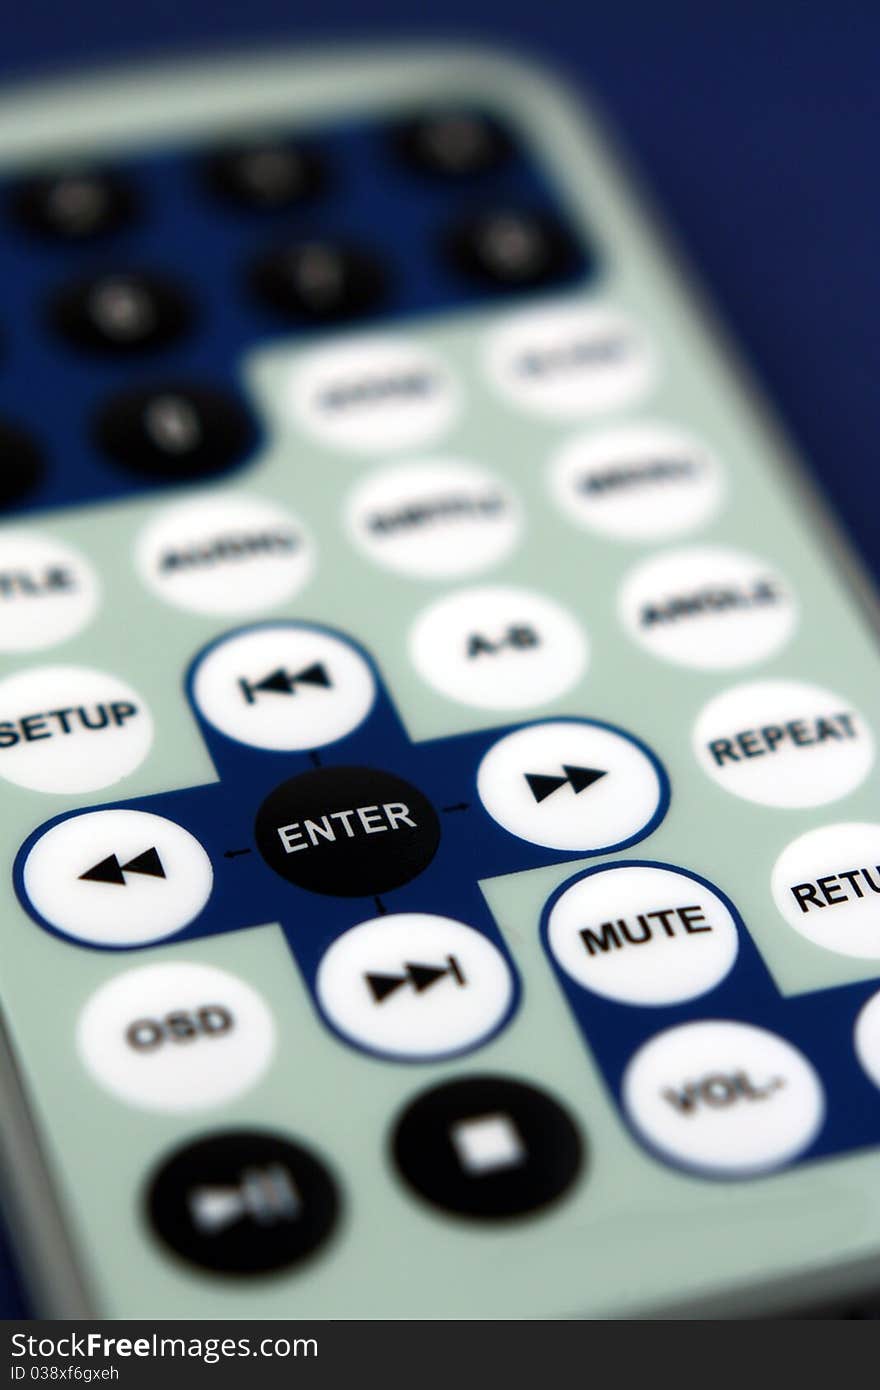 Detail of enter key on remote control